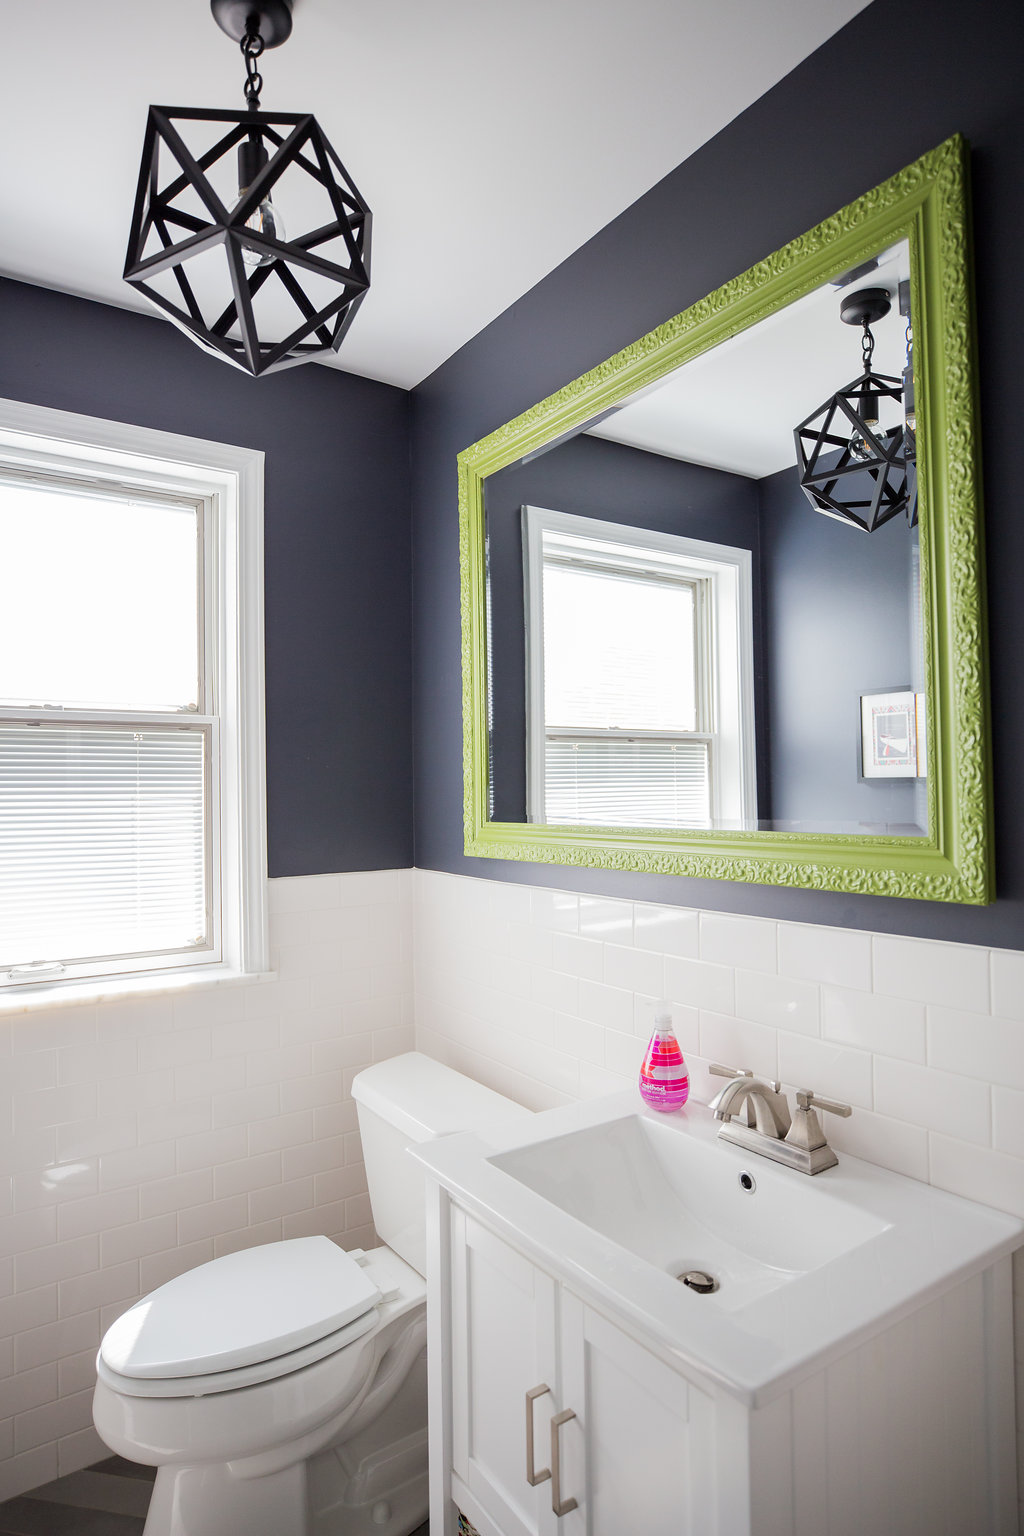 MMDH: Before & After Powder Room